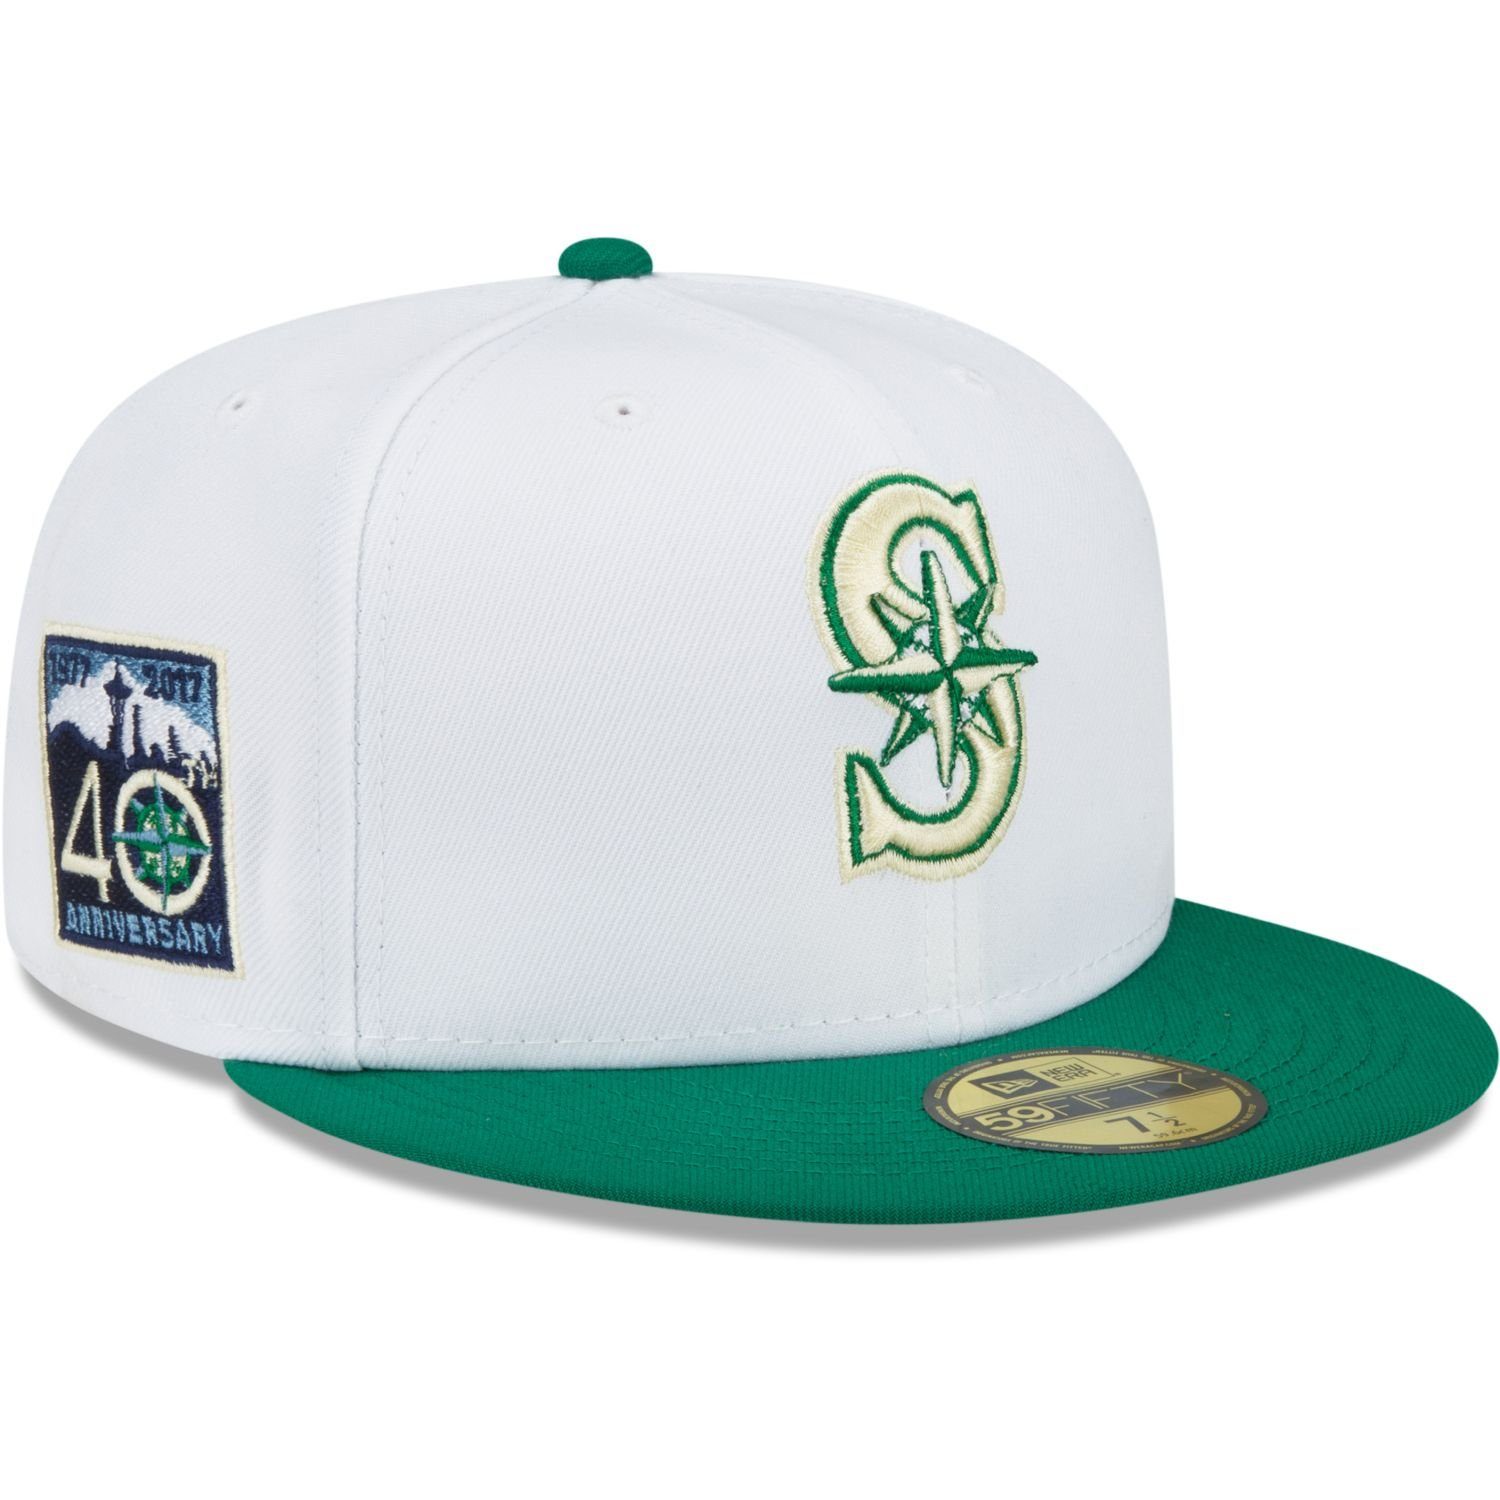 New Era Fitted Cap 59Fifty ANNIVERSARY Seattle Mariners